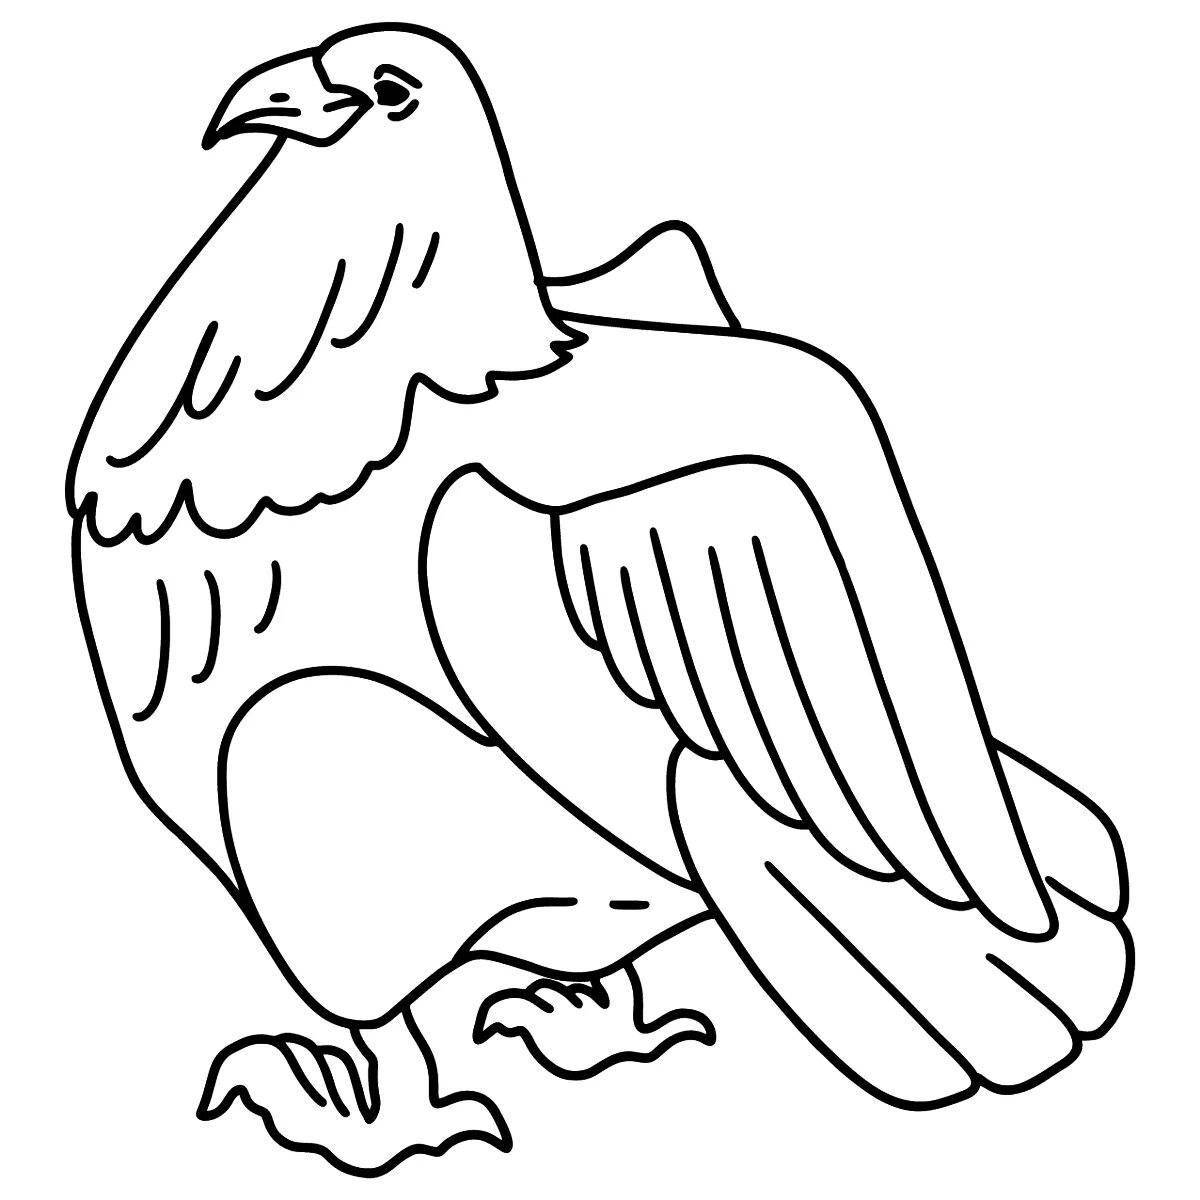 Majestic eaglet coloring page